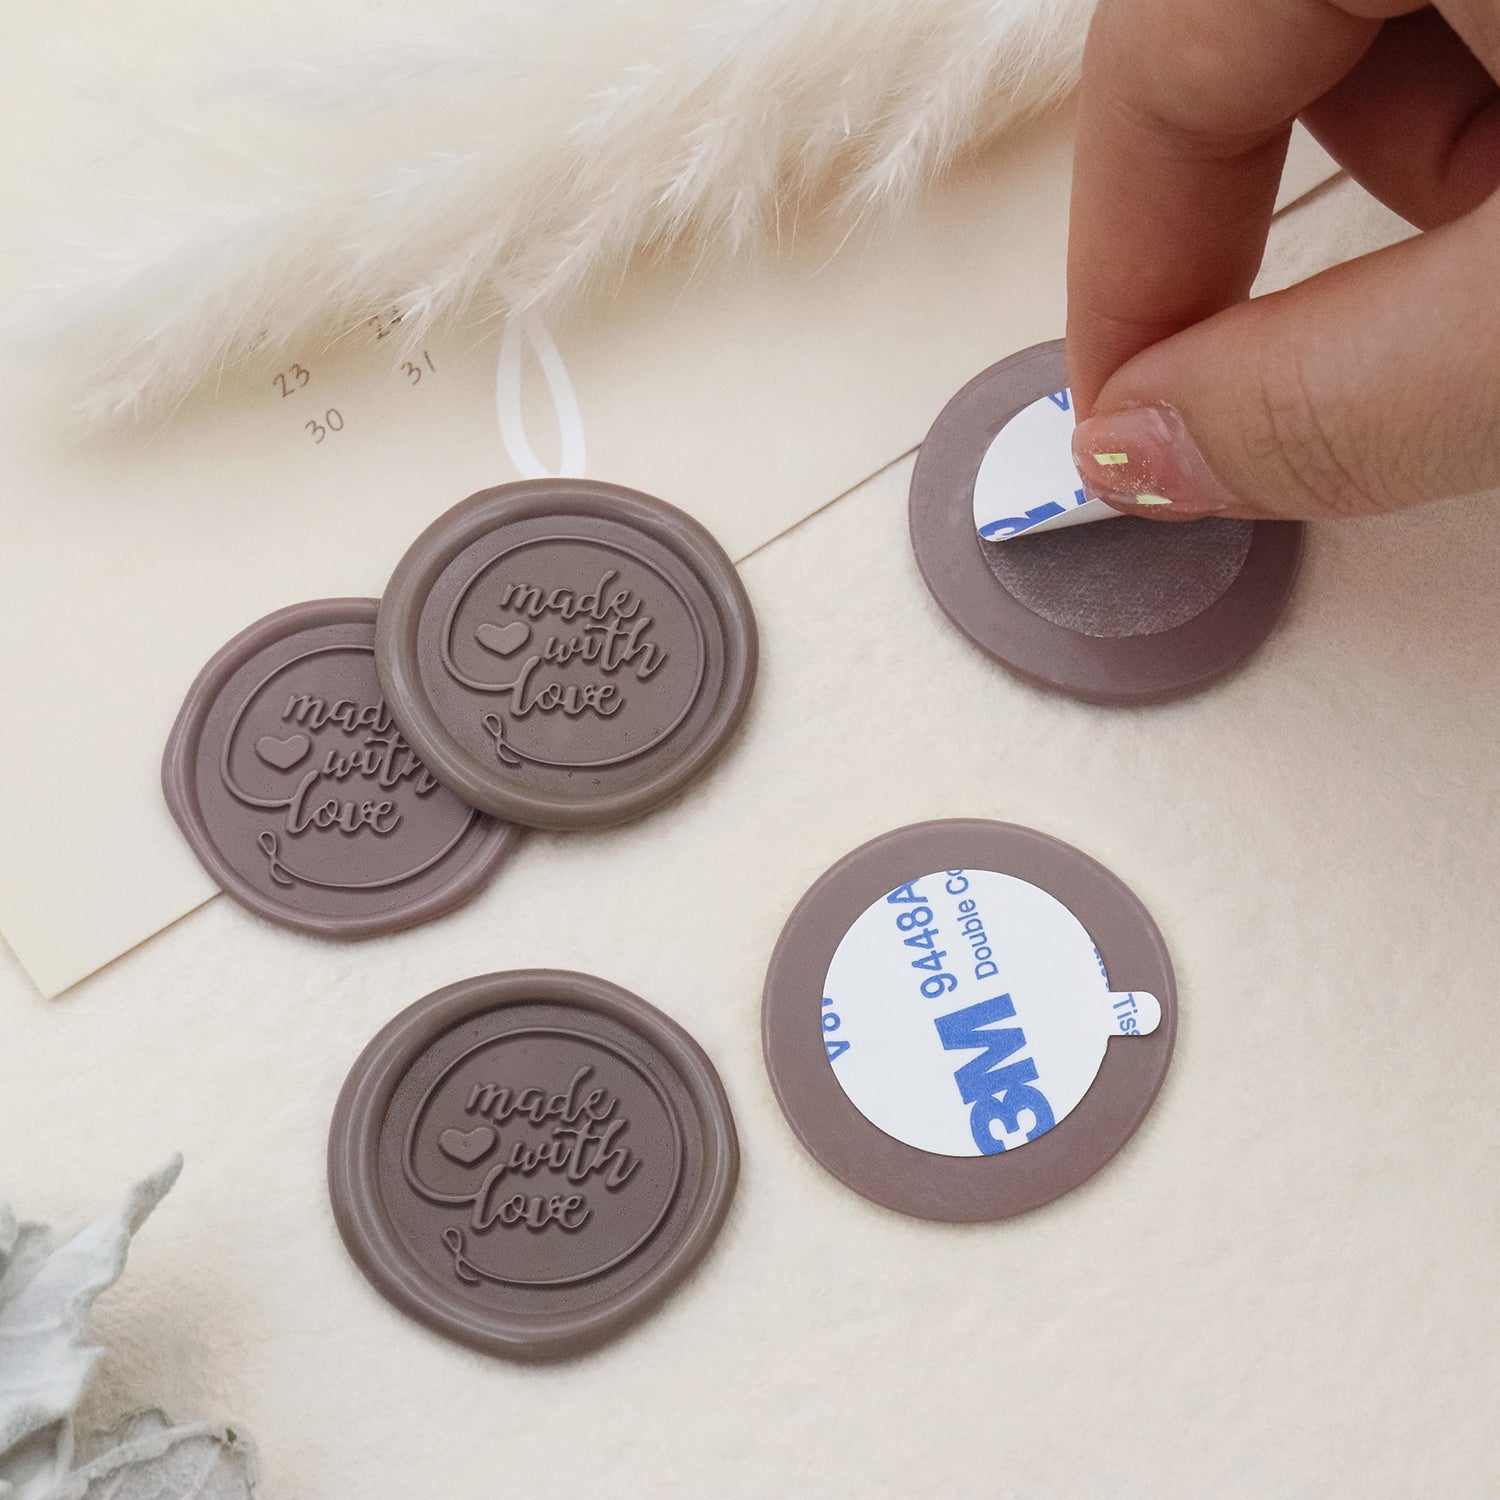 Stamprints Greeting Self-adhesive Wax Seal Stickers - Made With Love 2